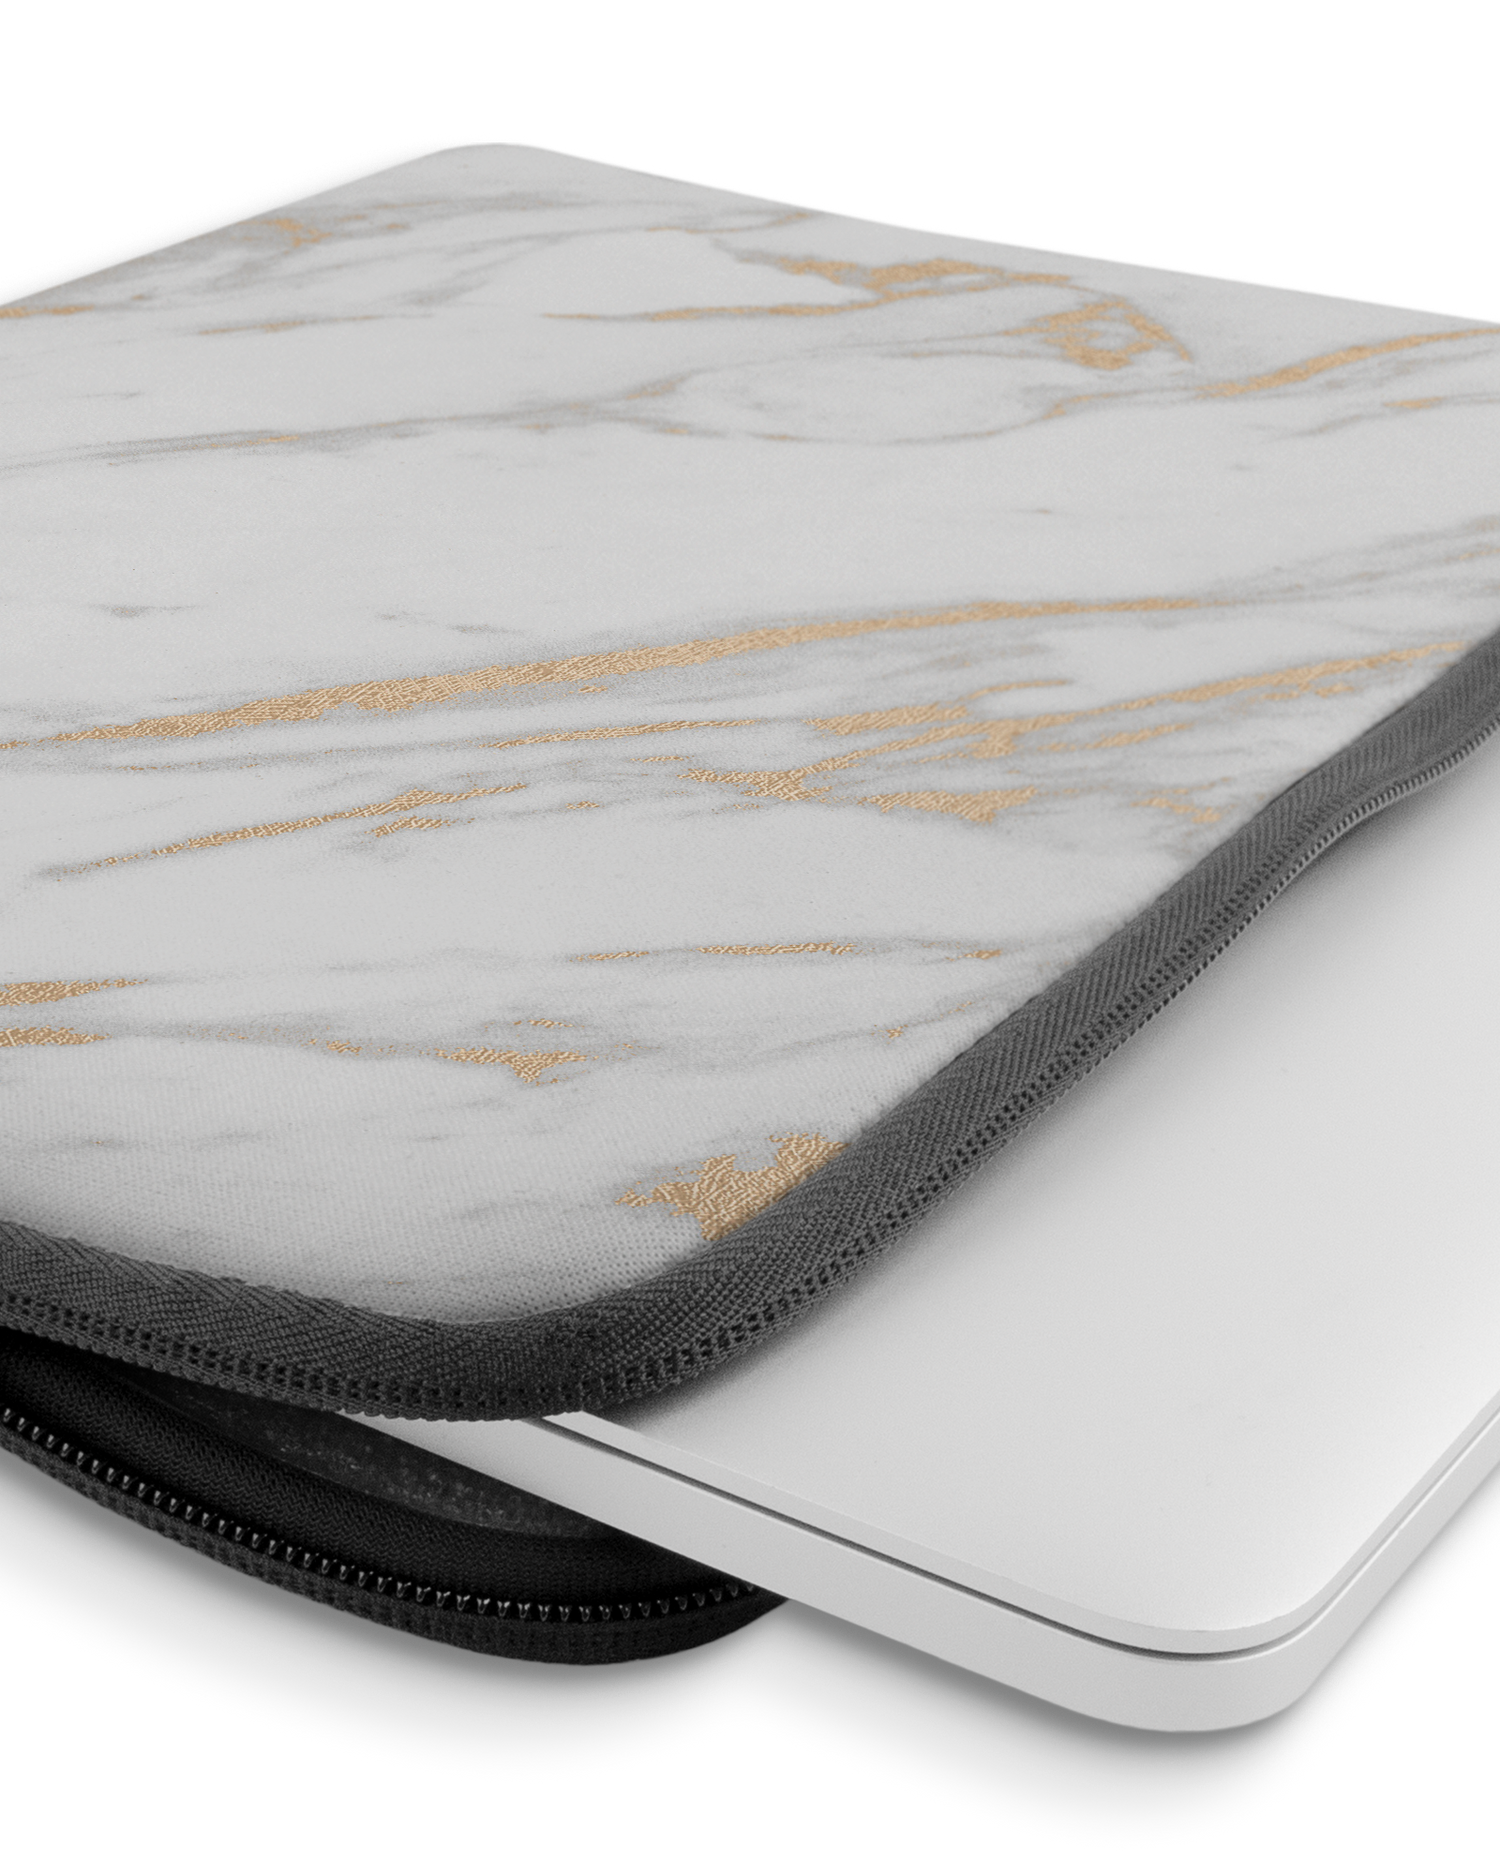 Gold Marble Elegance Laptop Case 14 inch with device inside